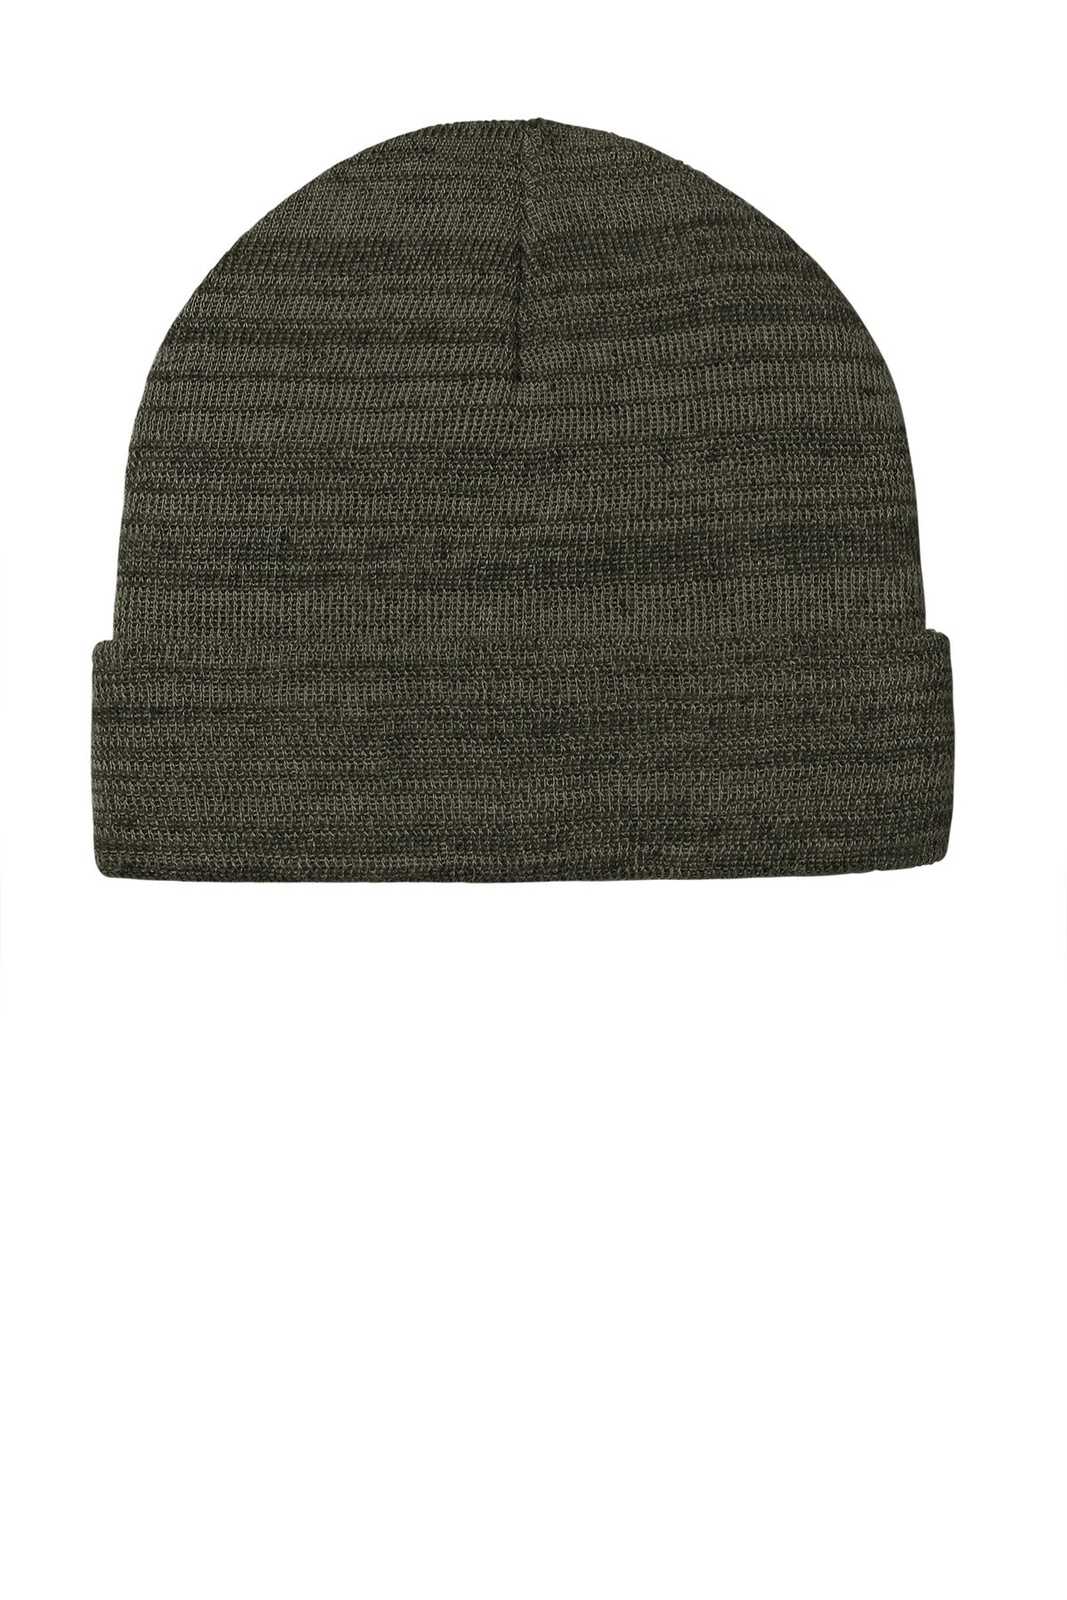 Port Authority C939 Knit Cuff Beanie - Olive Green Heather - HIT a Double - 1